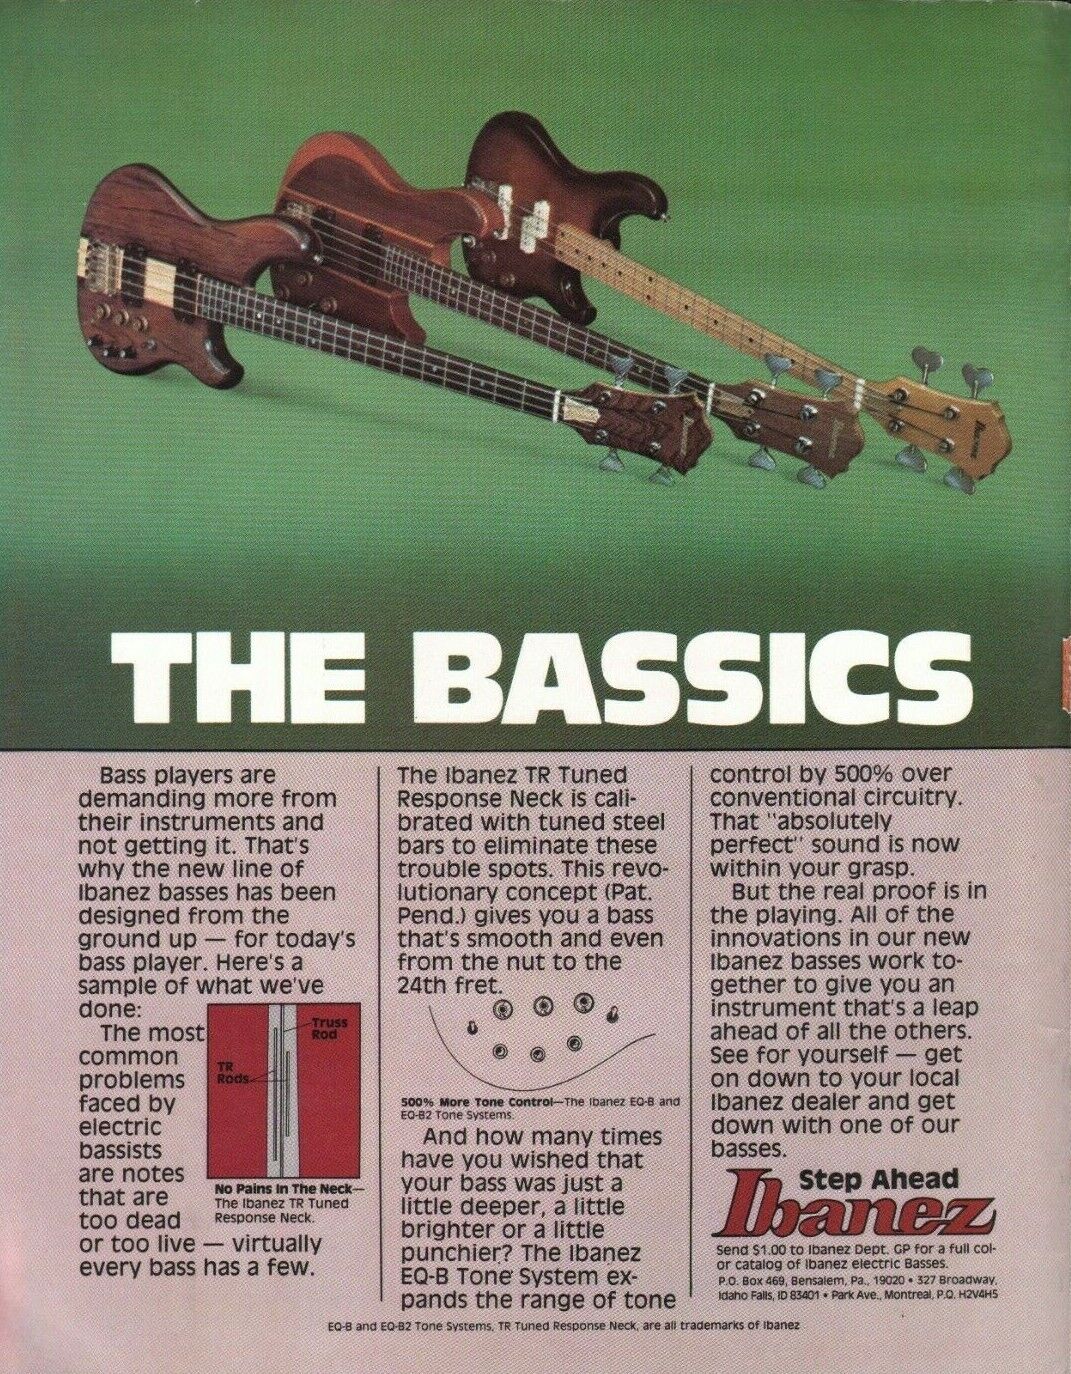 1980 Ibanez Bass TR Tuned Response Neck - Vintage Guitar Ad